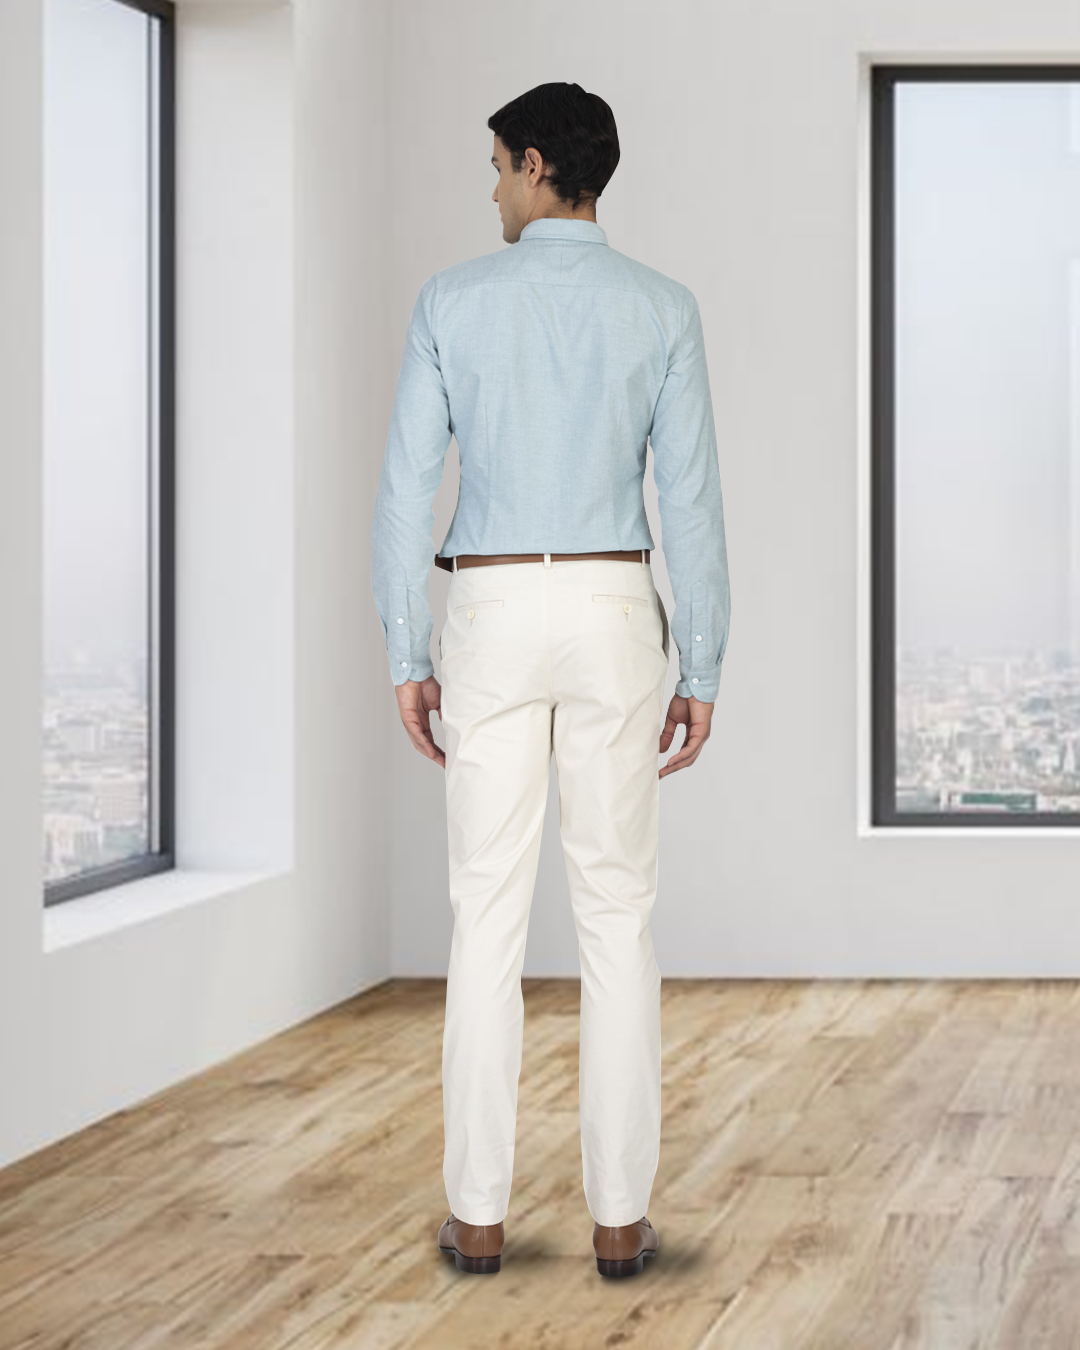 Back view of model wearing custom Genoa Chino pants for men by Luxire in ivory cream